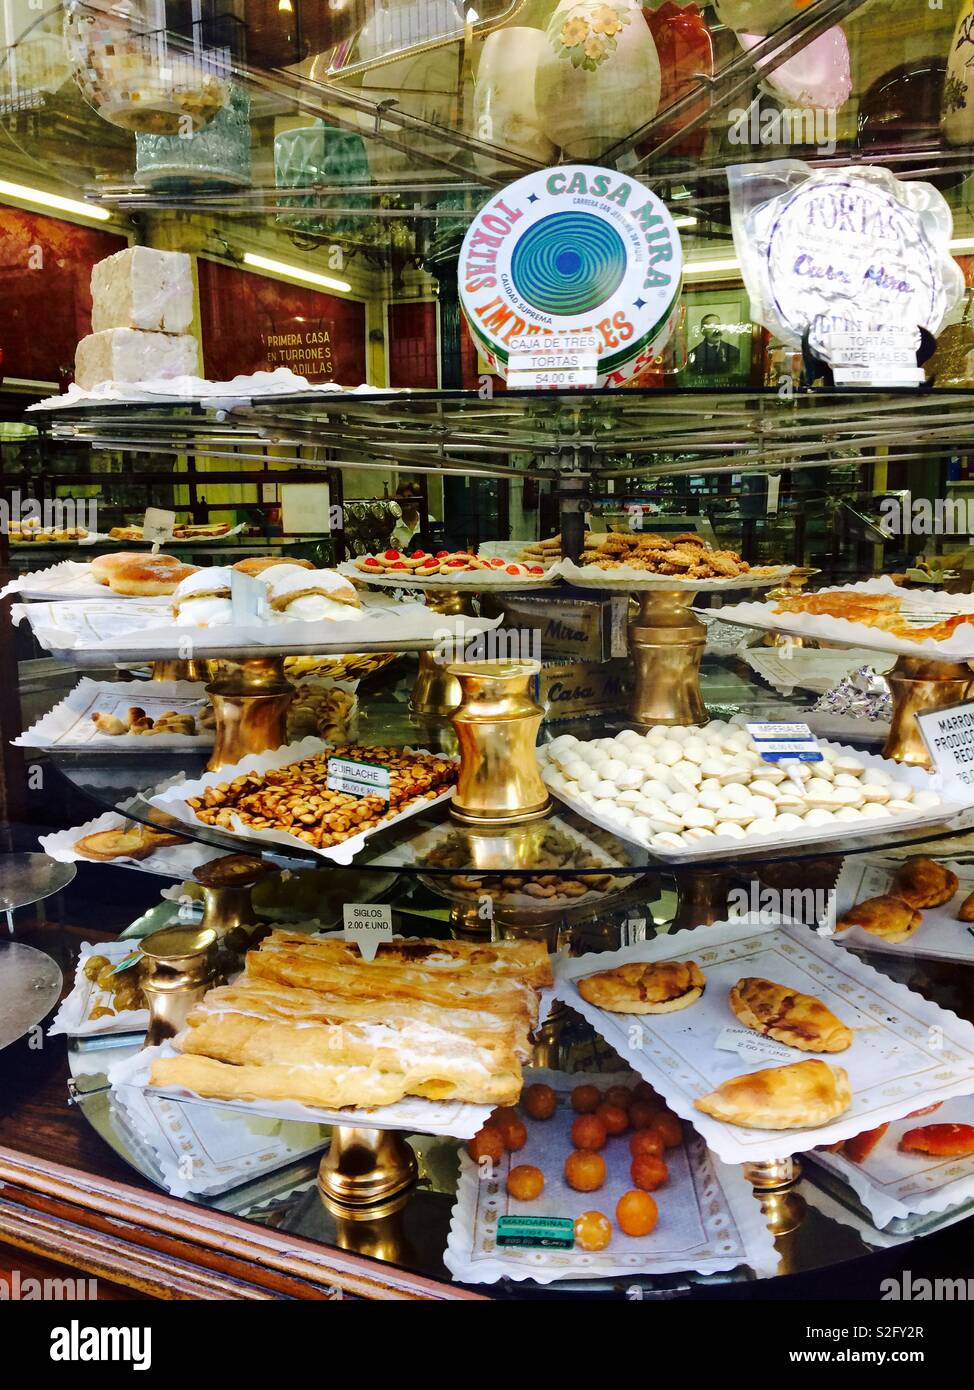 Pastries and assorted cakes and baked goods in shop window of Casa Mira pastry shop or bakery in Madrid Spain Stock Photo